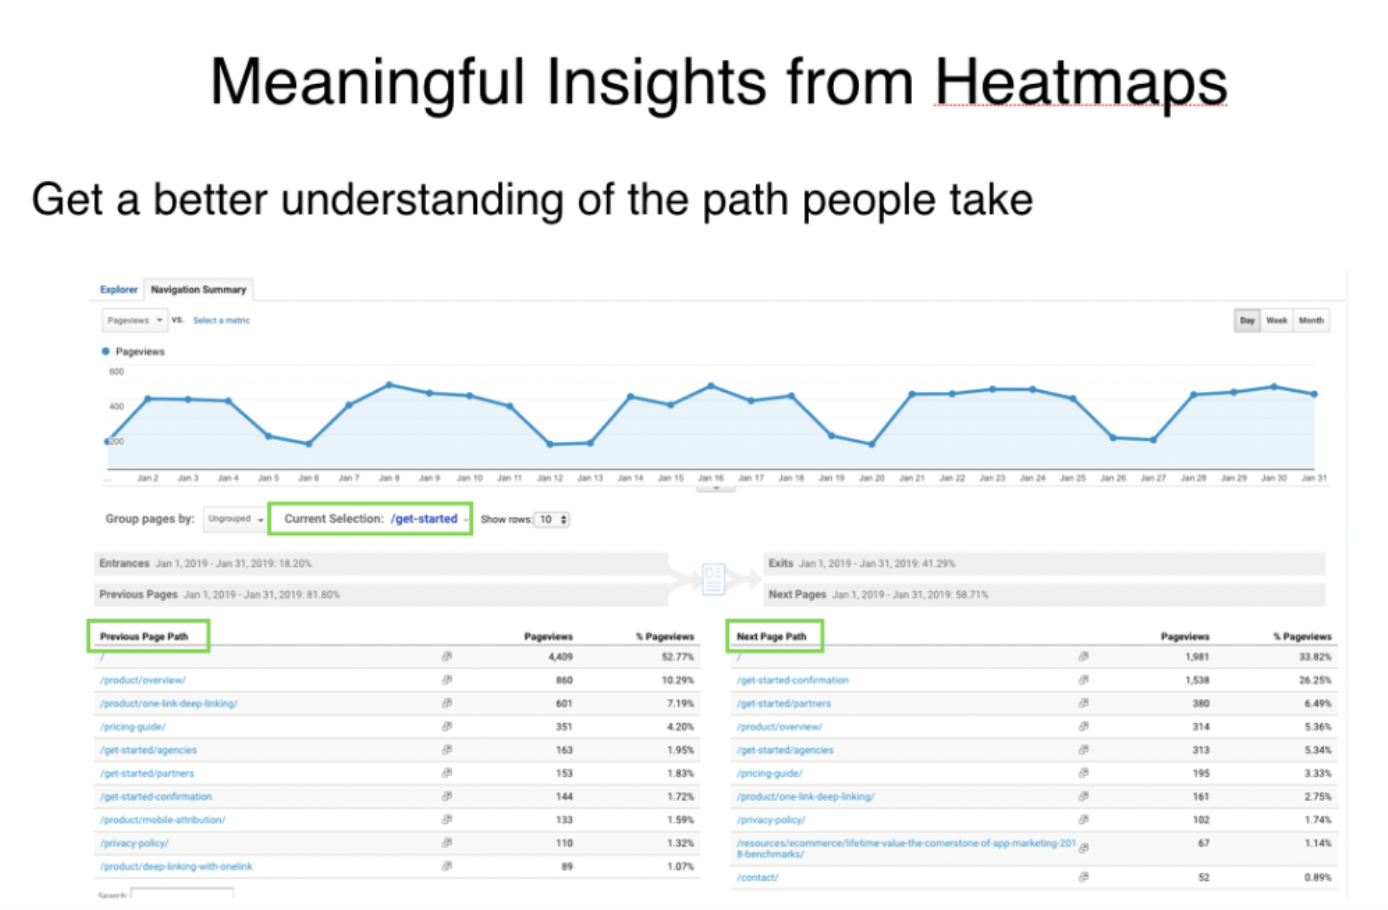 How to get meaningful insights from heatmaps by getting a better understanding of the path people take